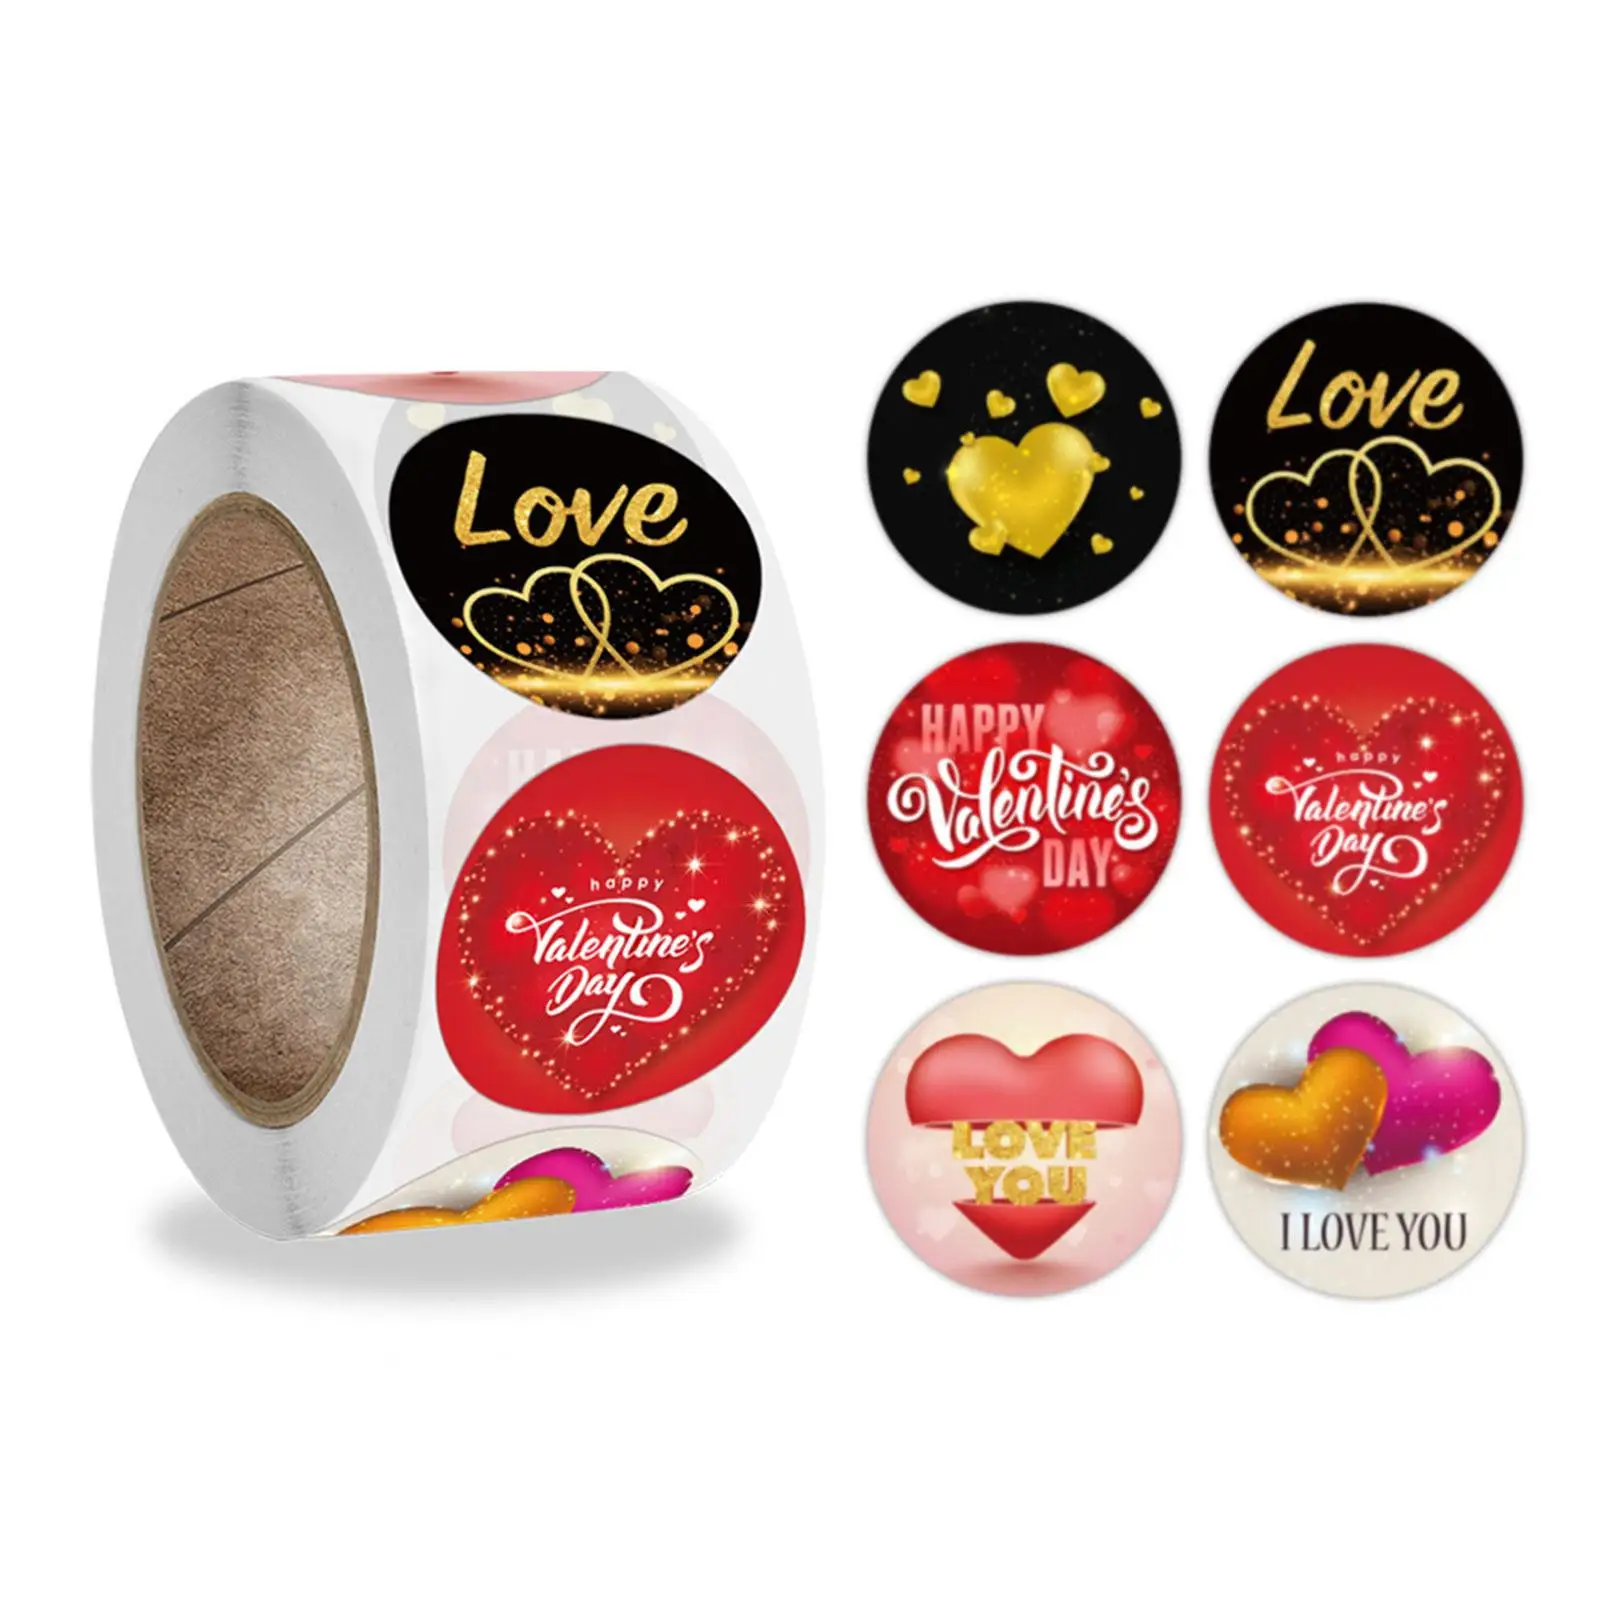 Valentines Loving Heart Stickers Envelope Stickers Decals Label for Birthday Gift Packaging Card Making Festival Dessert Boxes